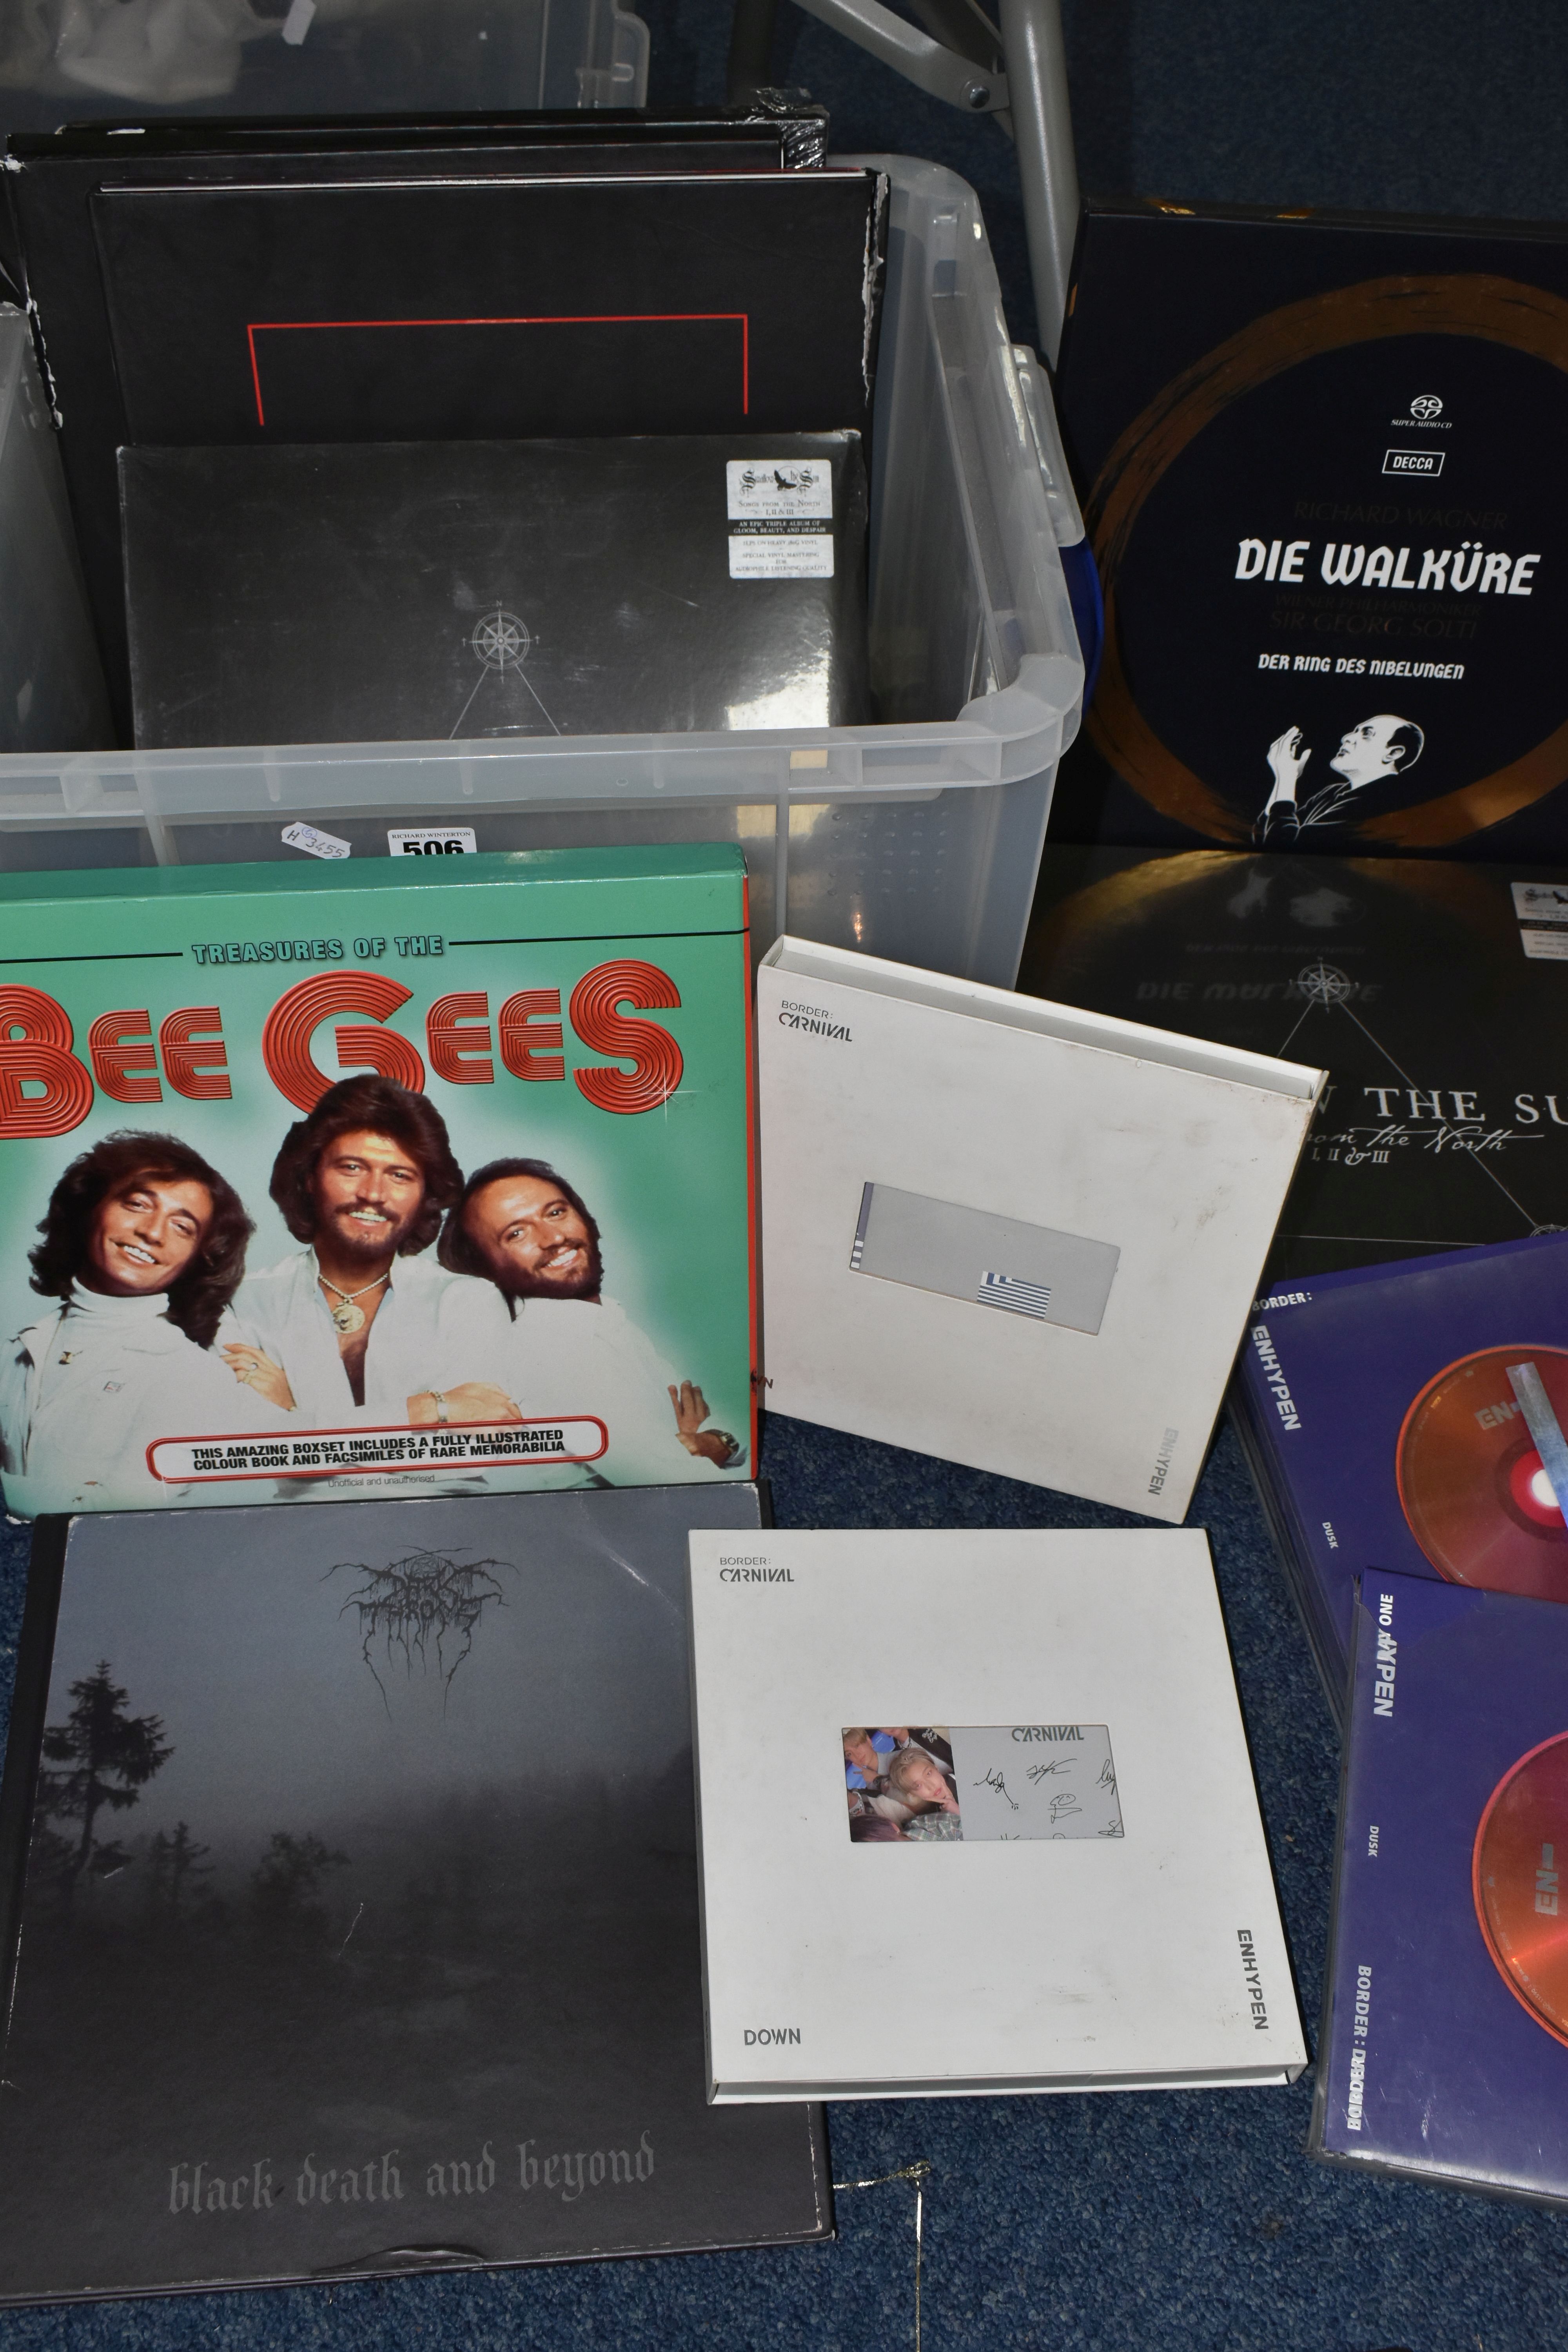 A SELECTION OF SPECIAL EDITION MUSIC MEMORABILIA, pieces include 'Treasures of the Beegees' book